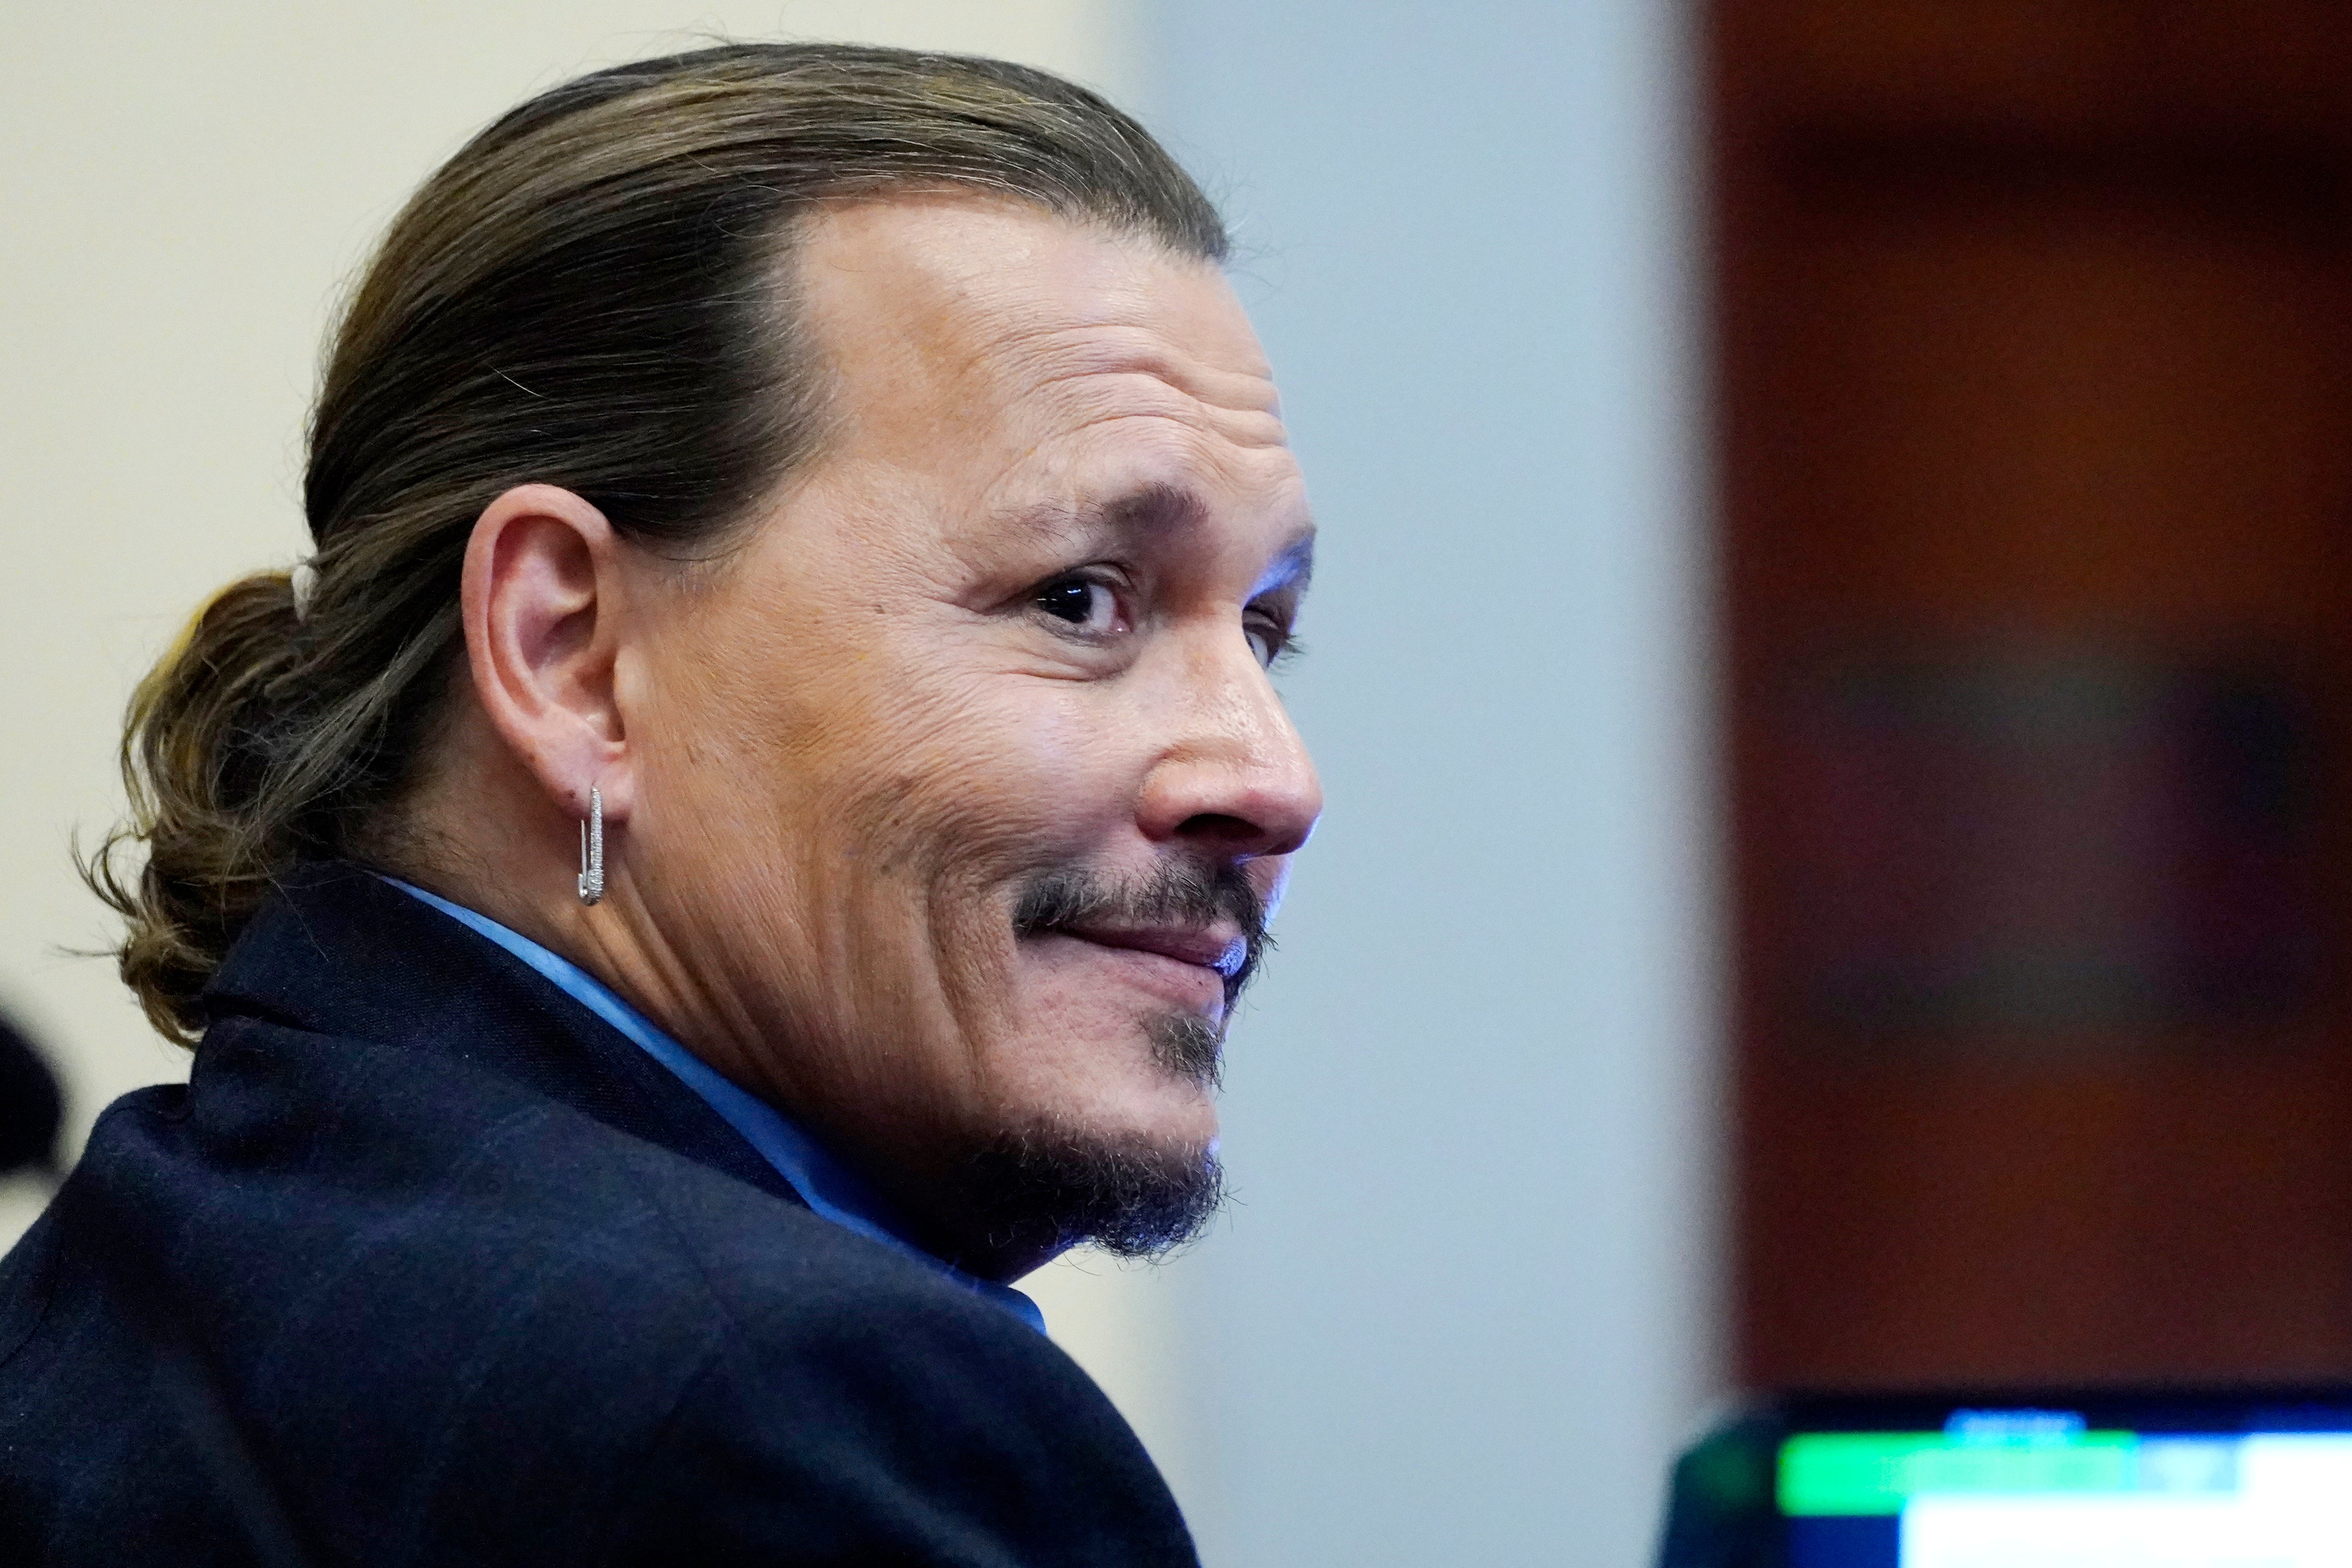 Many Heard-haters are watching Johnny Depp deliver one of his finest performances